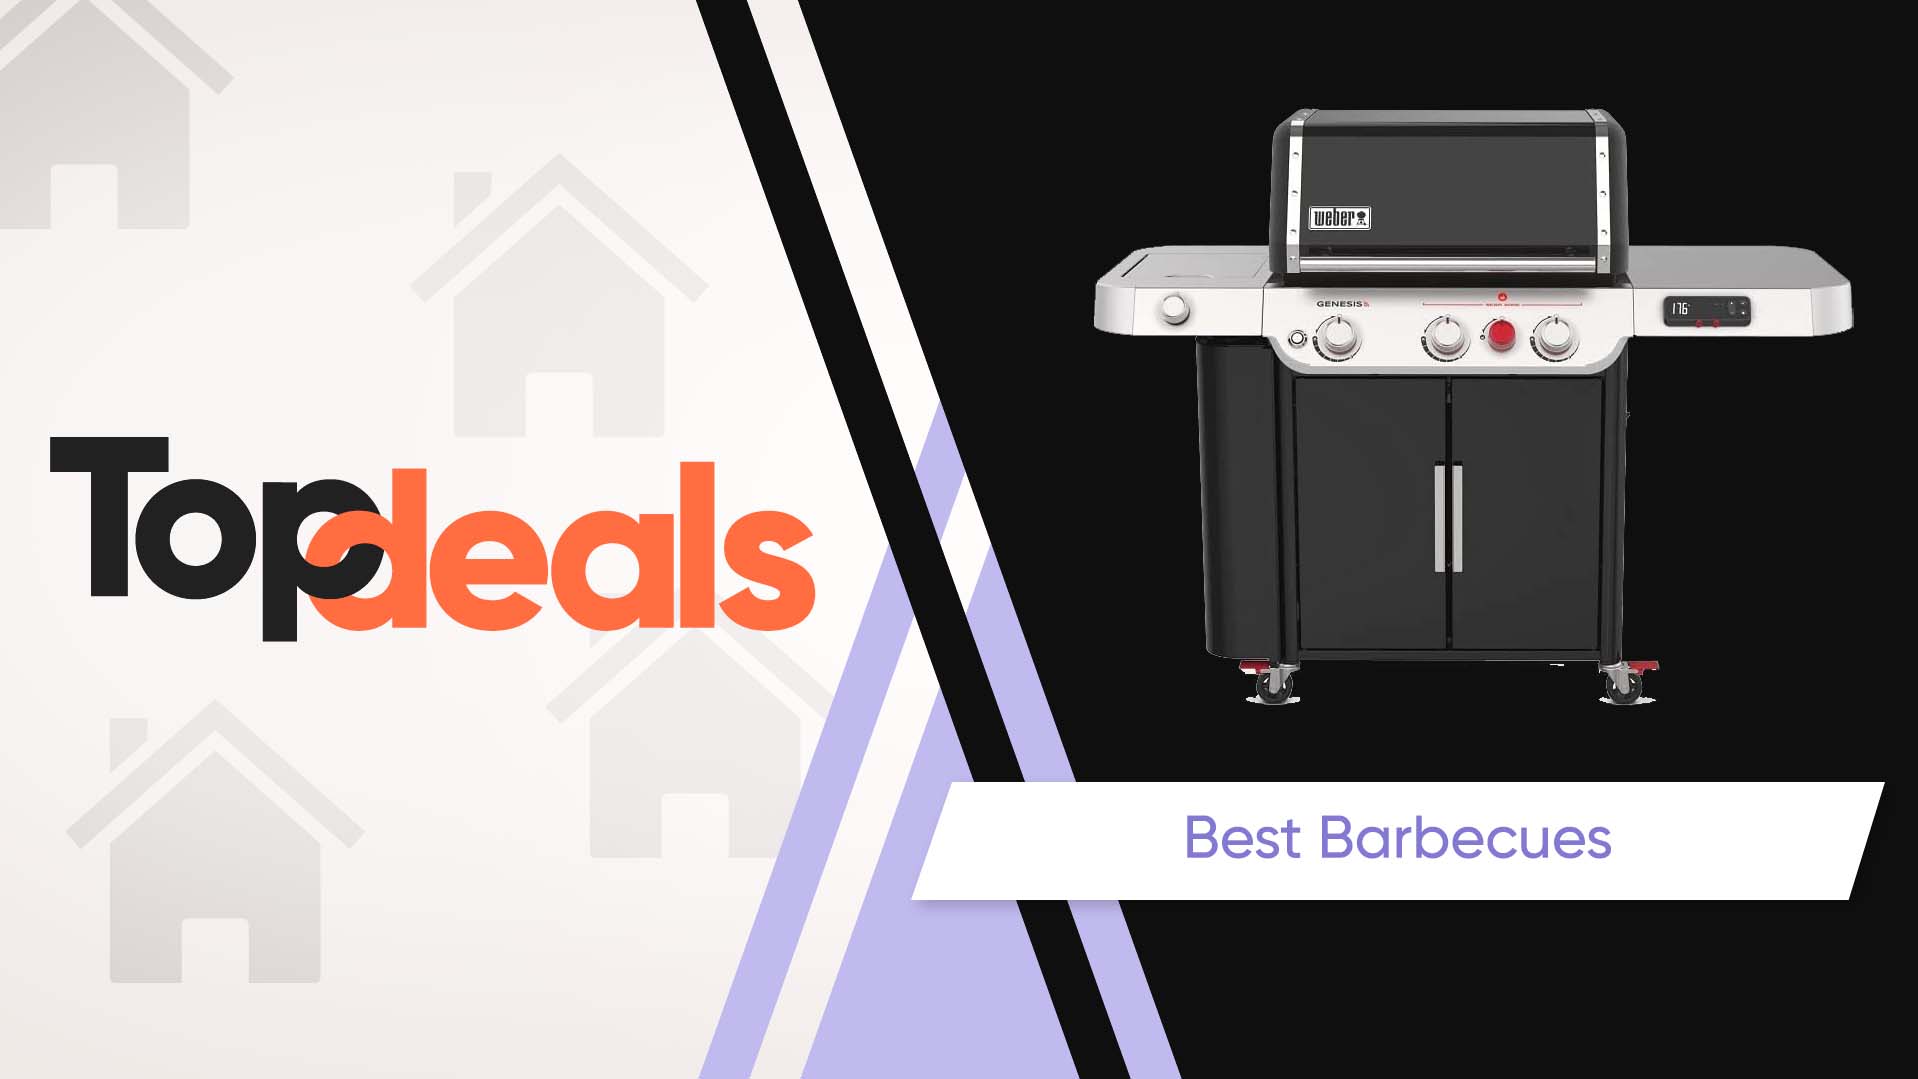 Best barbecues